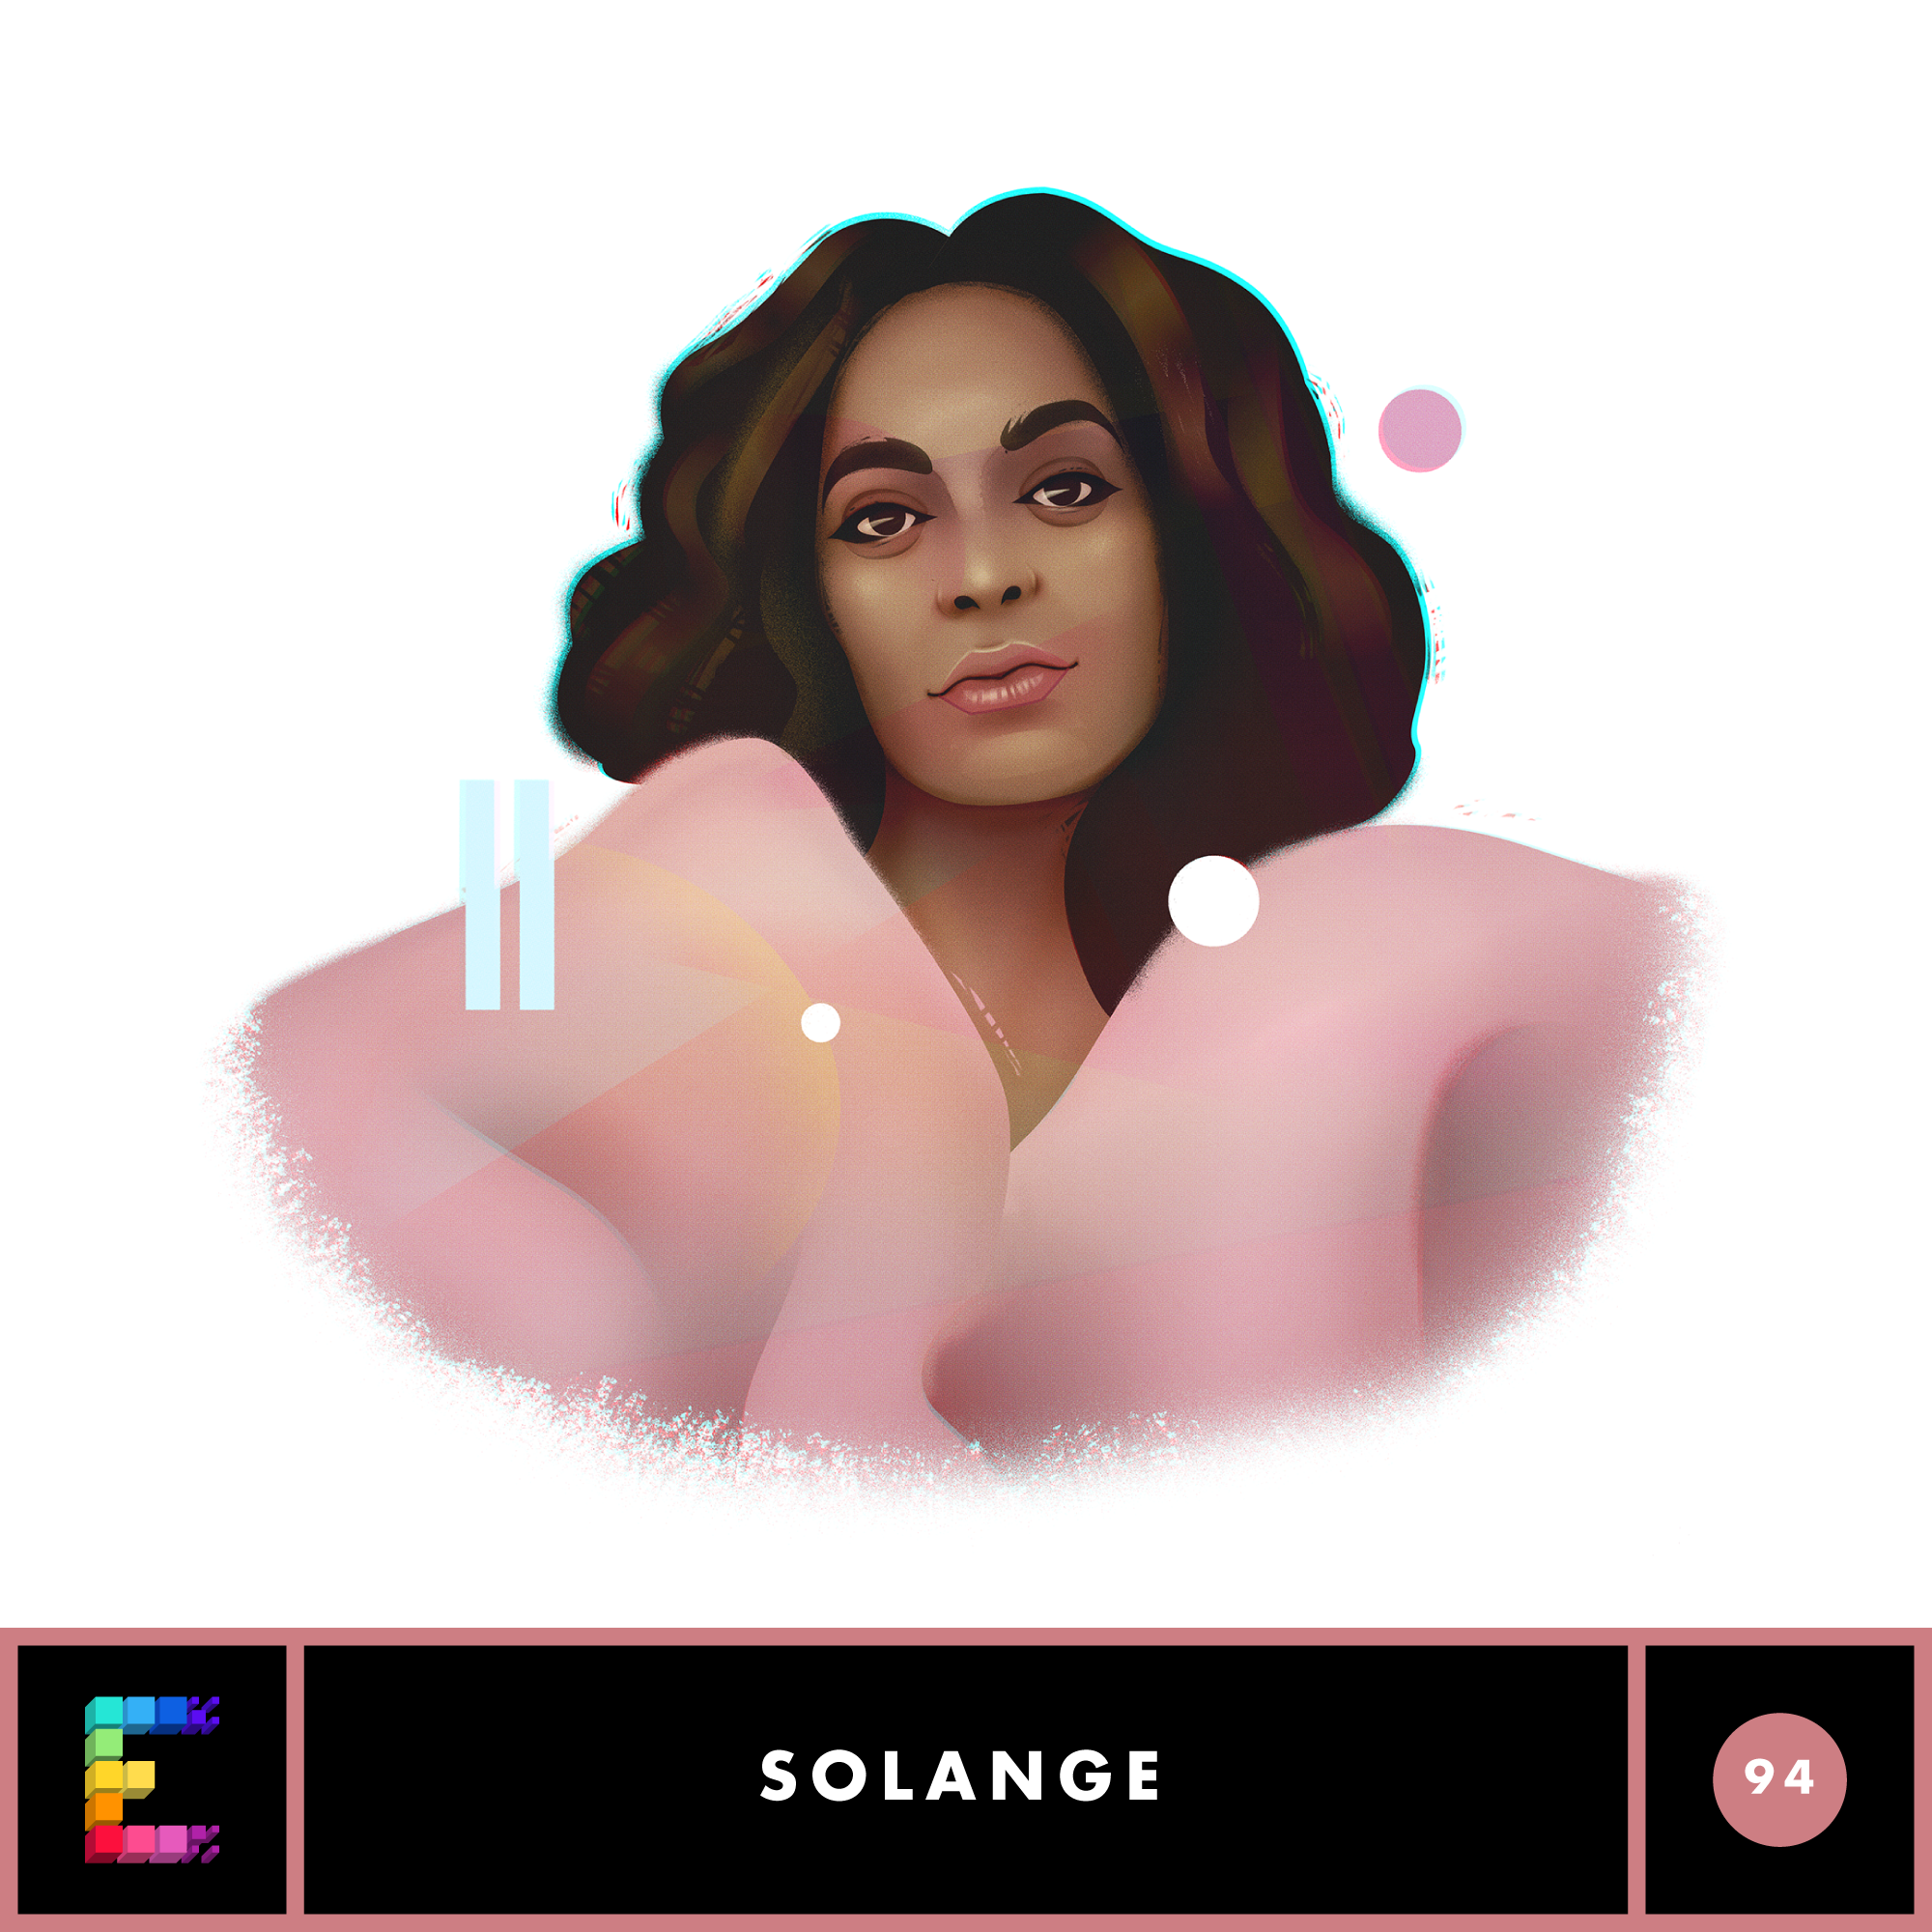 Solange Channels Her Mom and Her Aunties in "Cranes in the Sky"